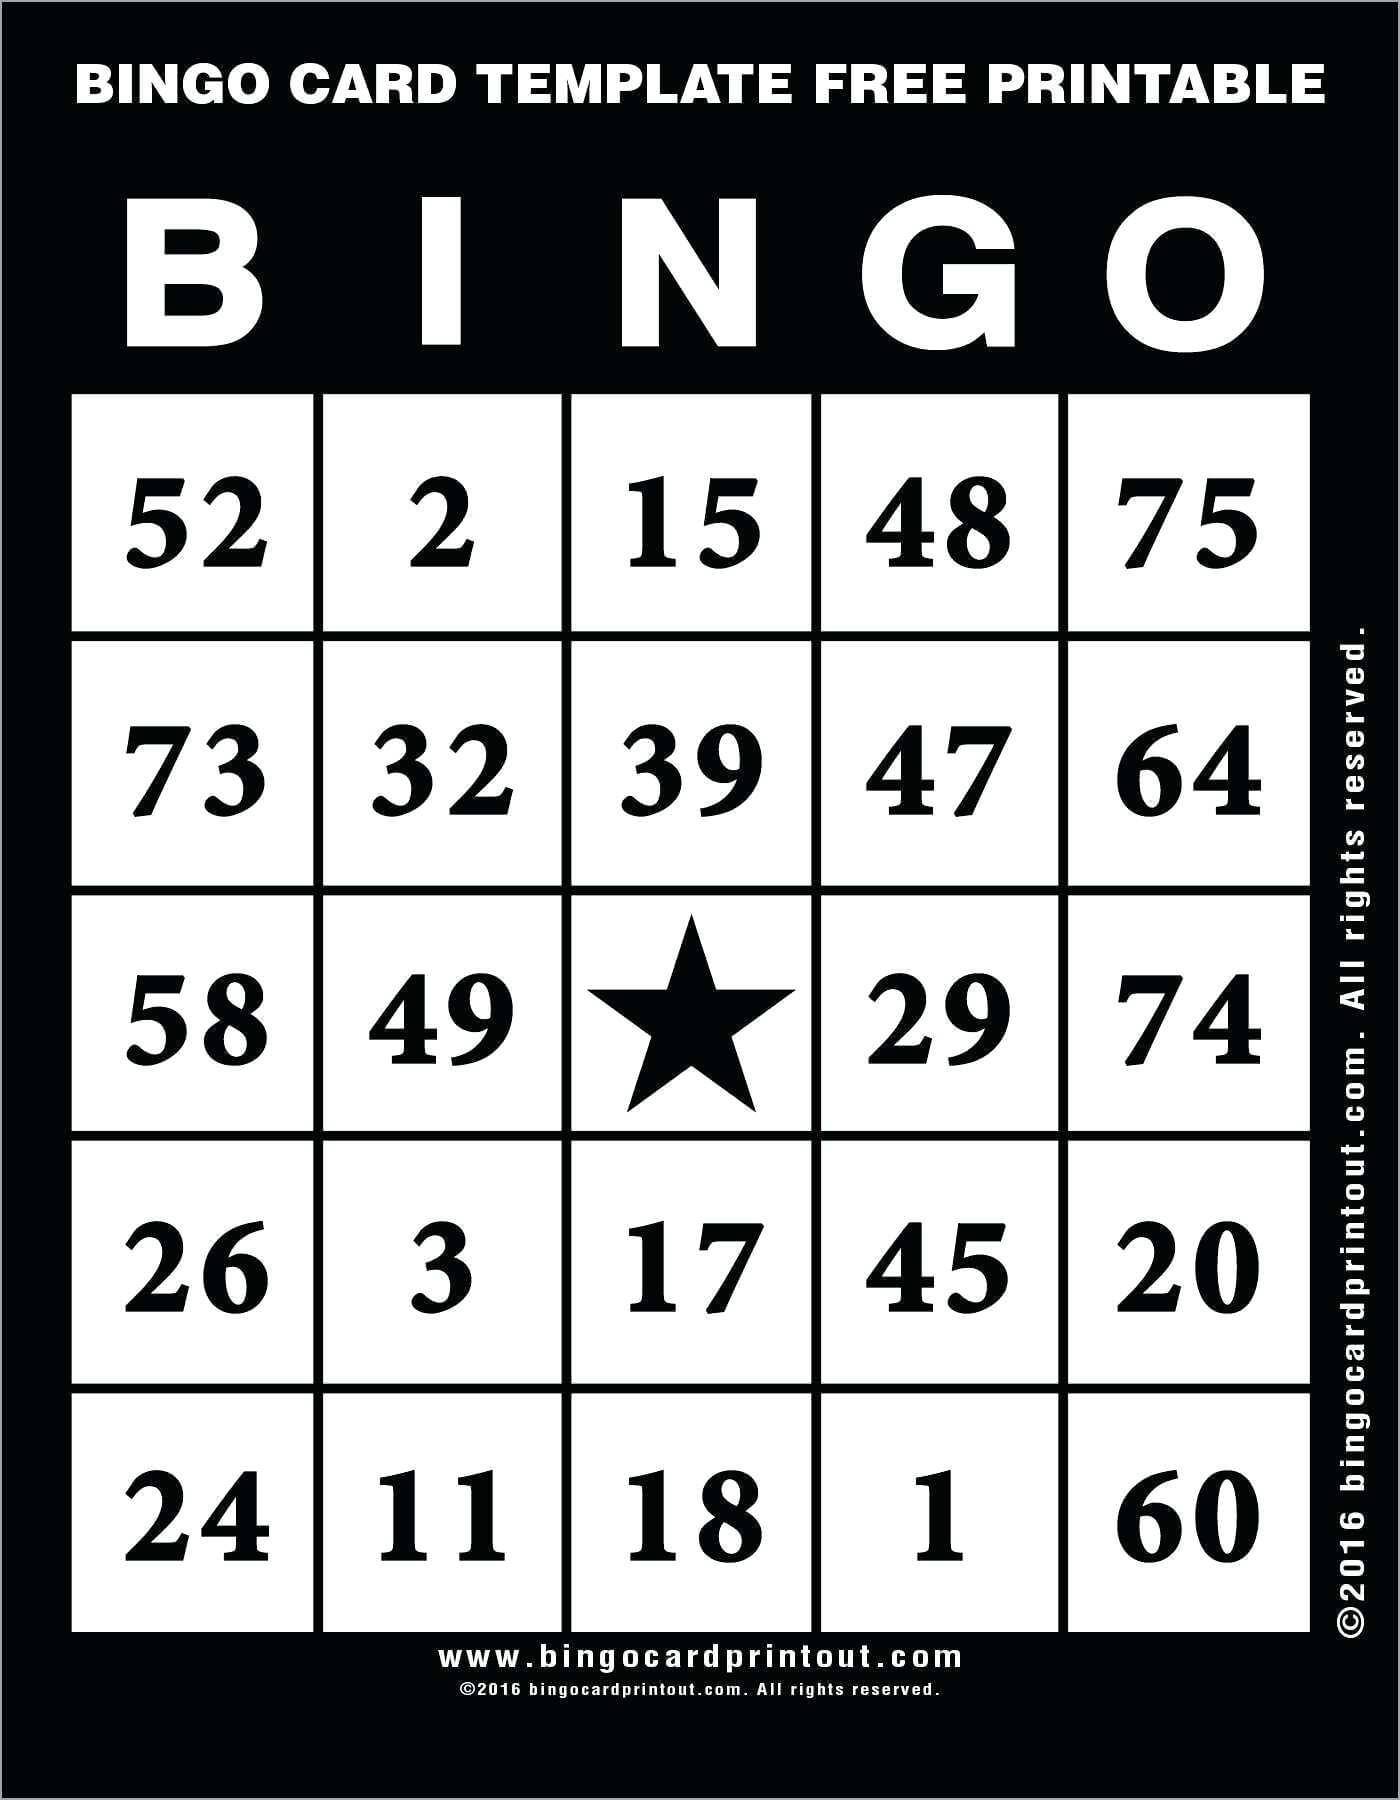 016 Trading Card Template Free Ideas Photo Fabulous Bingo Pertaining To Soccer Trading Card Template